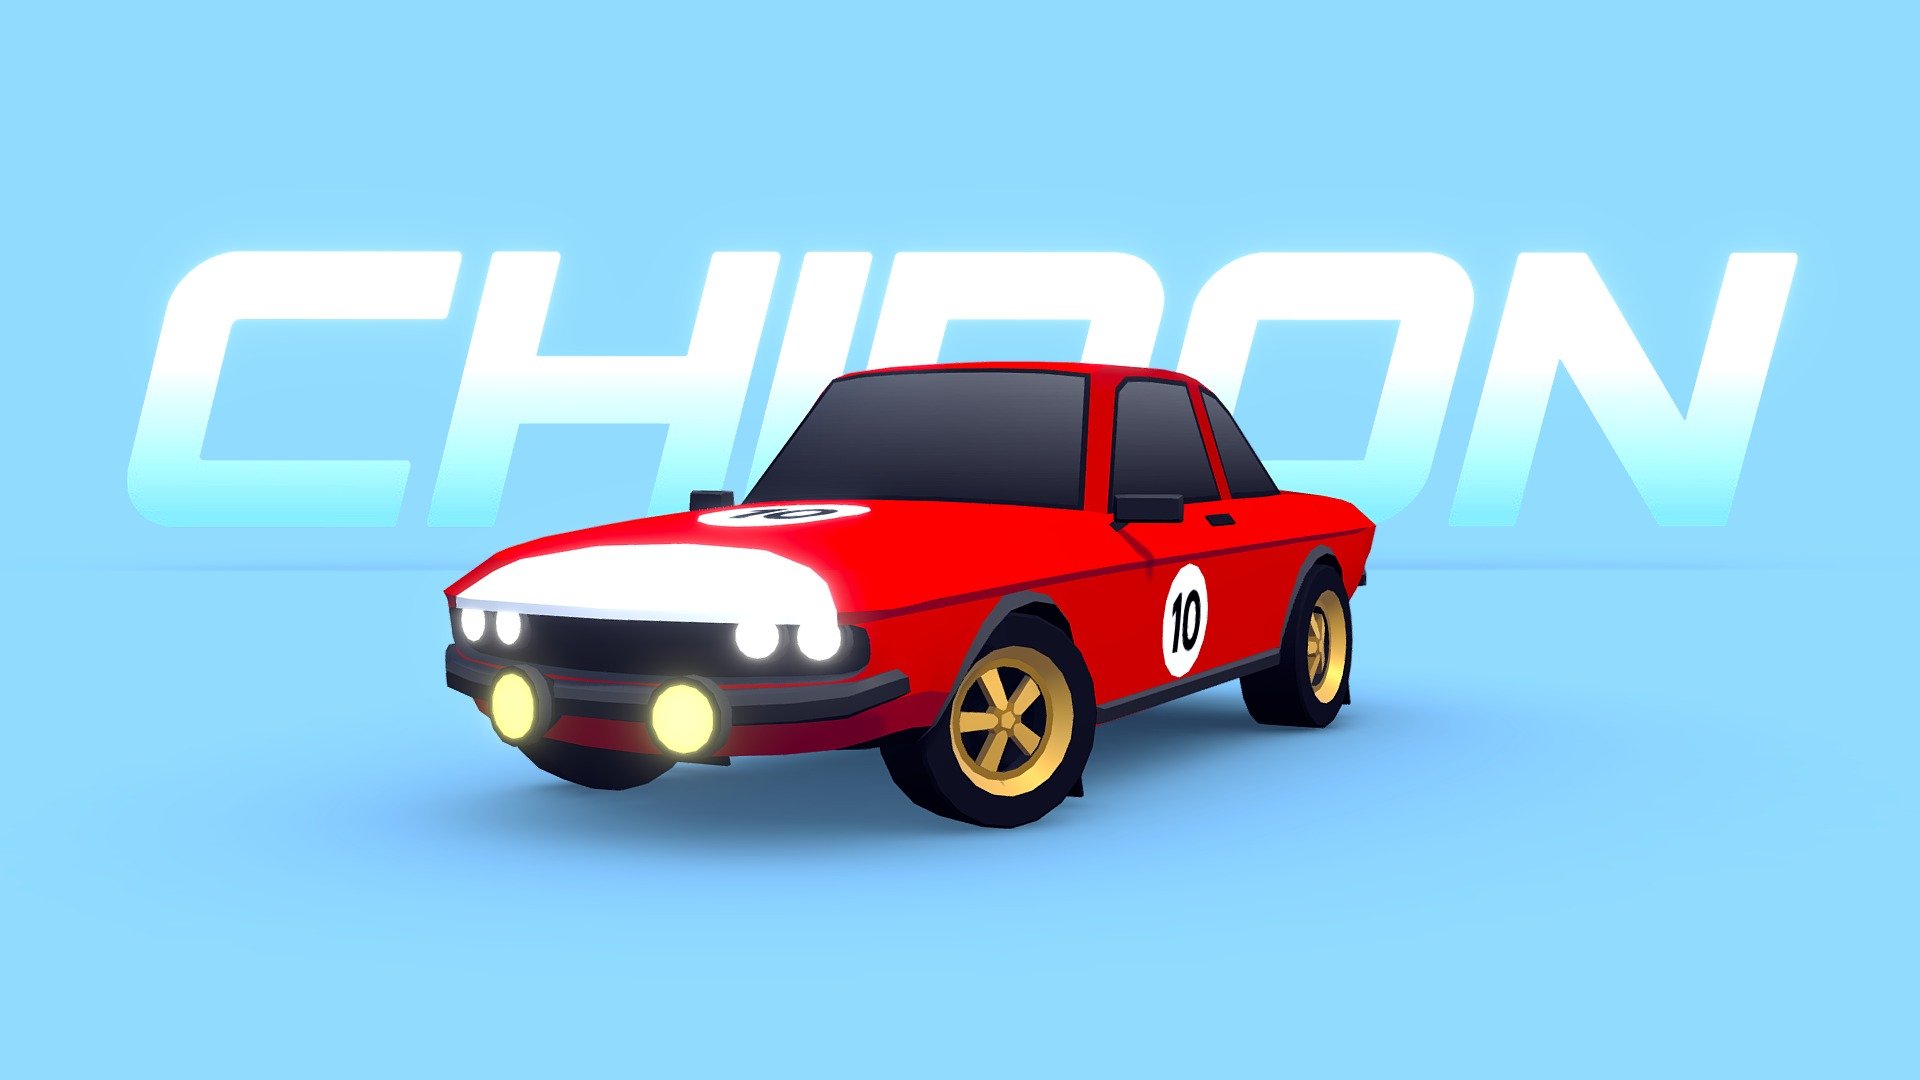 This car will be part of the new update for ARCADE: Rally Cars Pack, which will include new cars, new vinyls and visual enhancements for all cars!. This model is called &ldquo;Chiron 